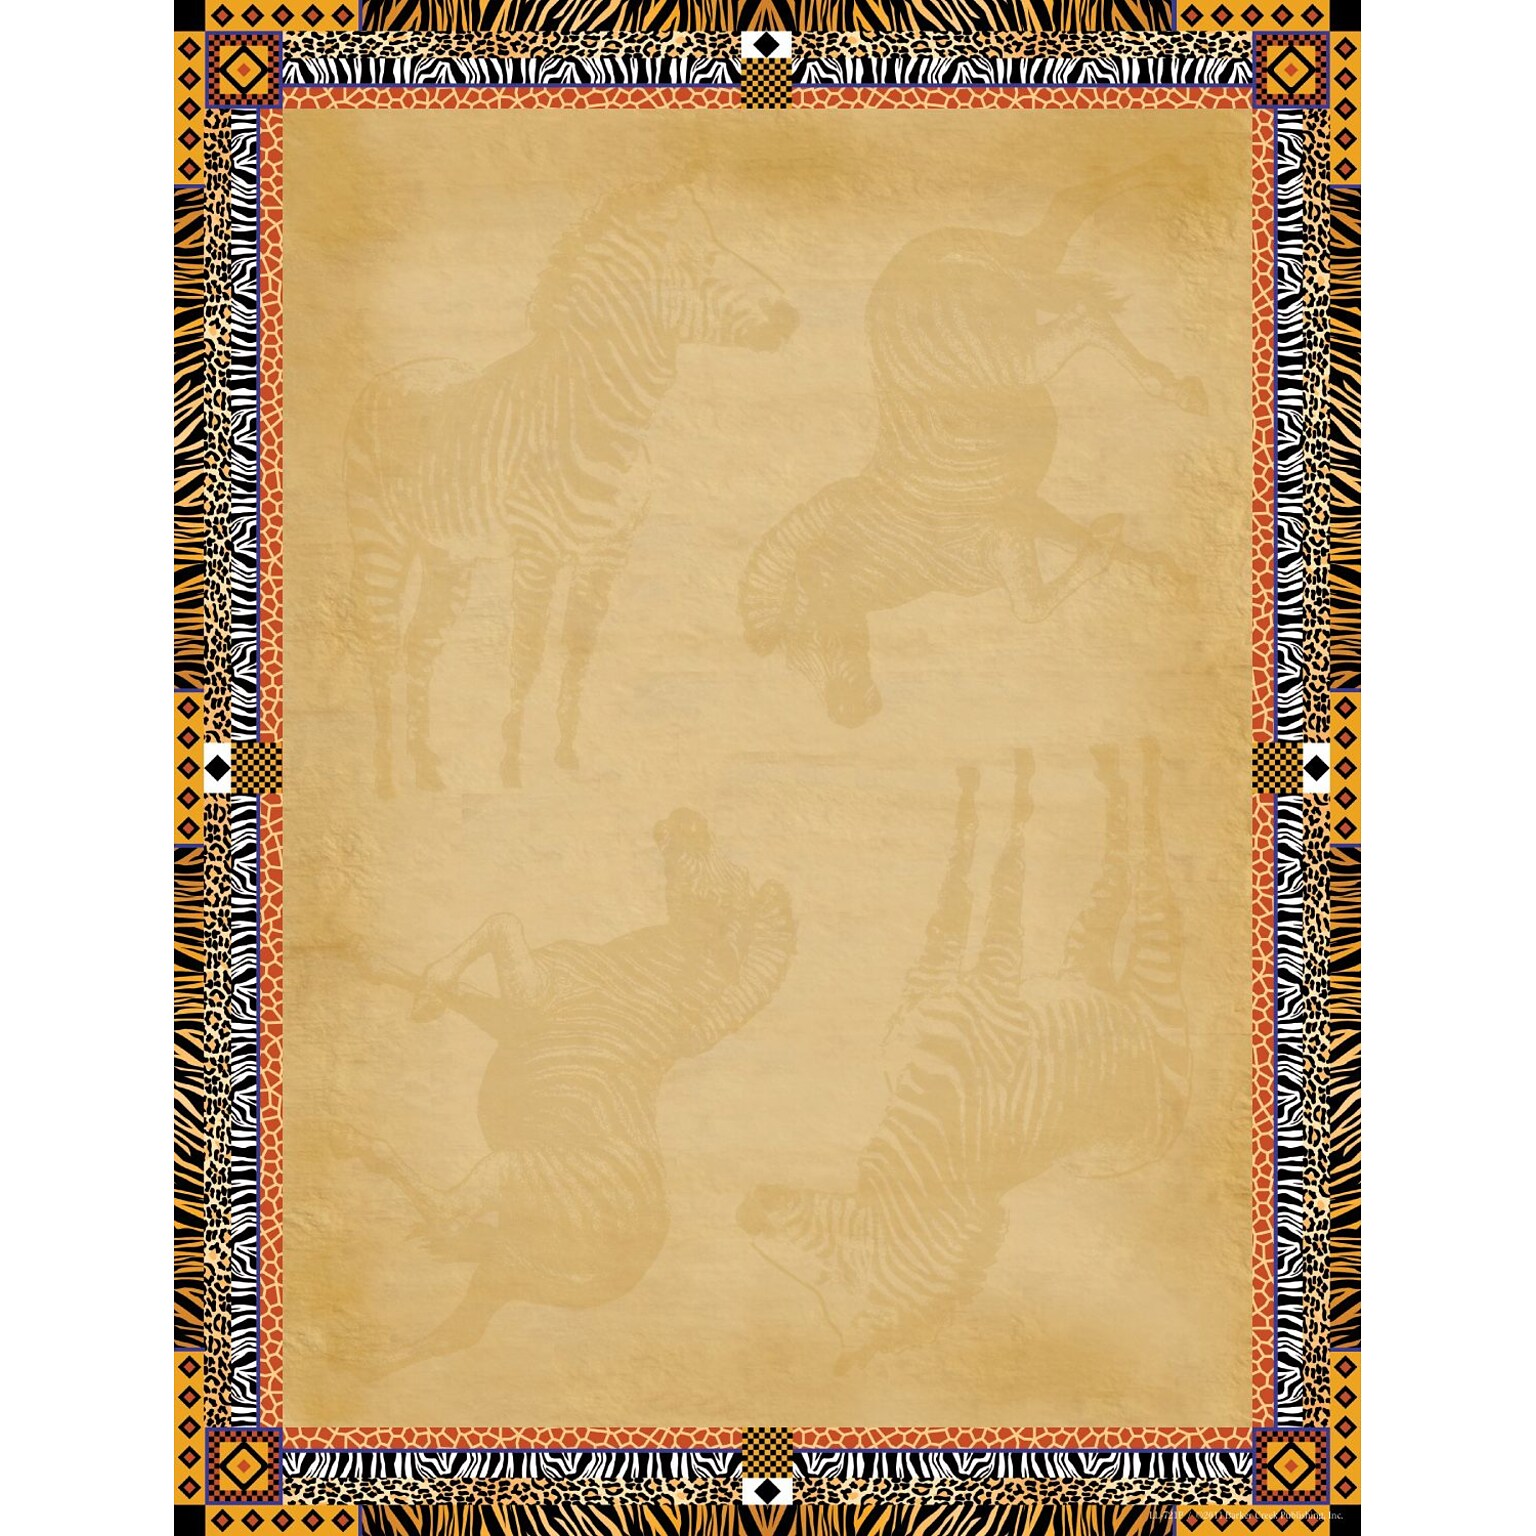 Barker Creek Africa Stationery Decorative Paper 8.5 x 11, Brown (LL721)